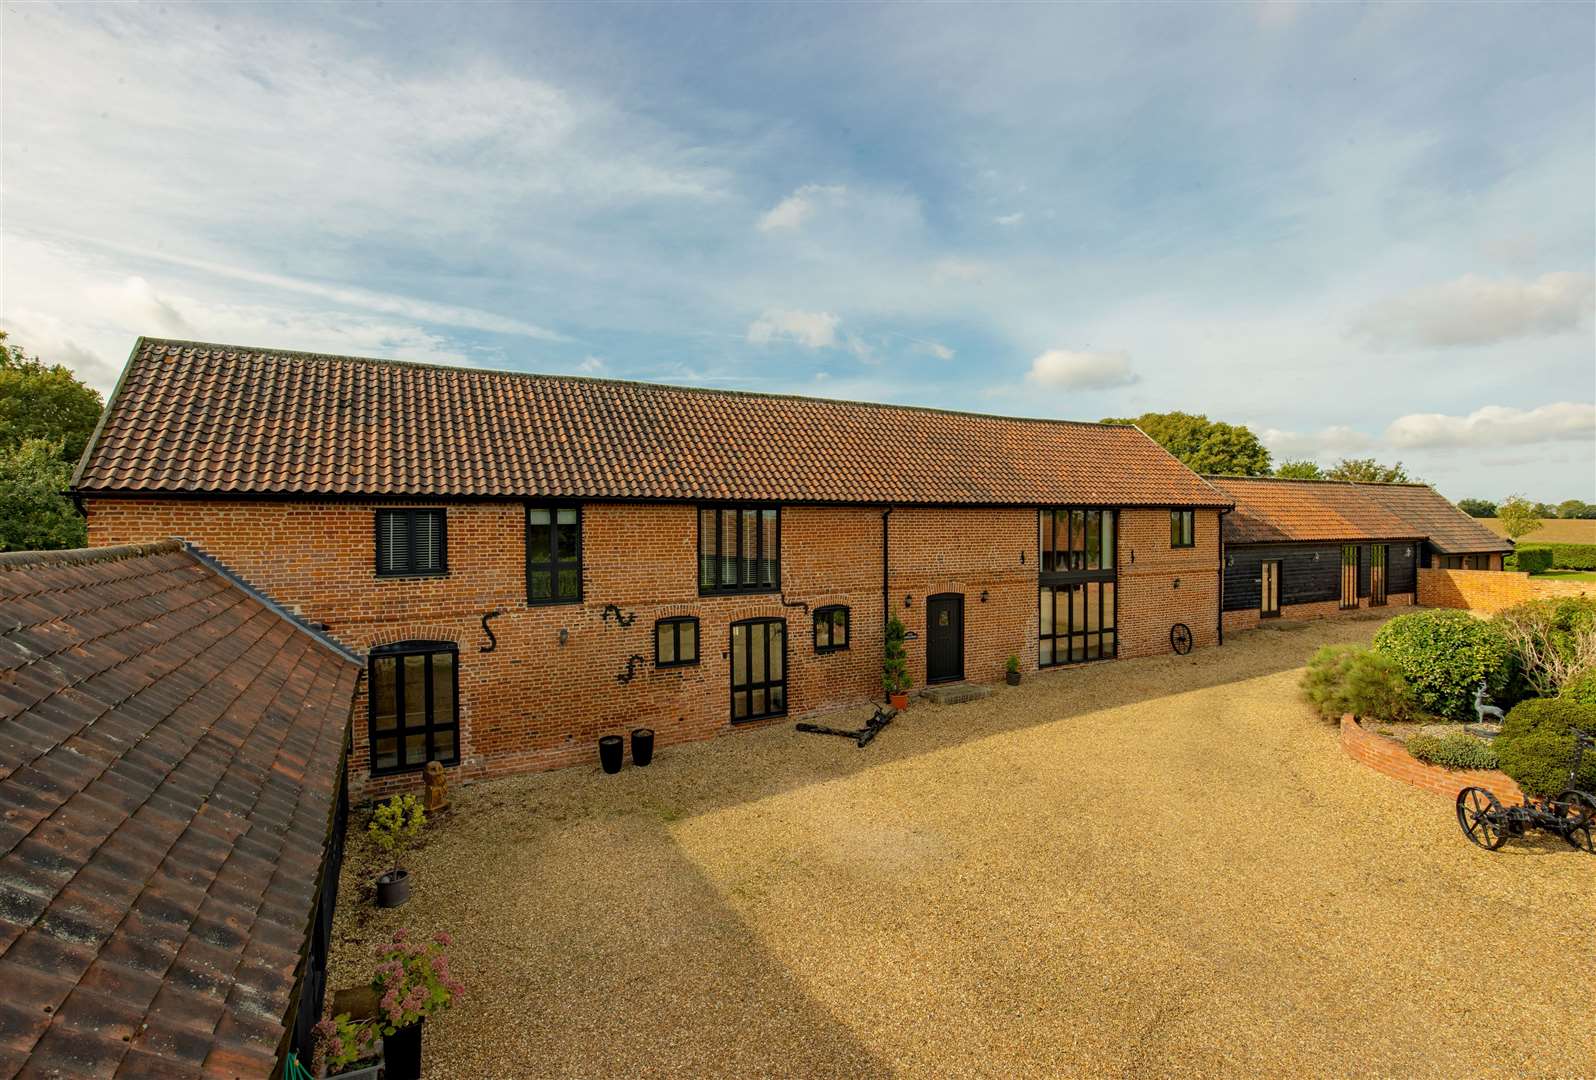 The property sits between Helions Bumpstead and Haverhill and is set in the backdrop of rolling farmland